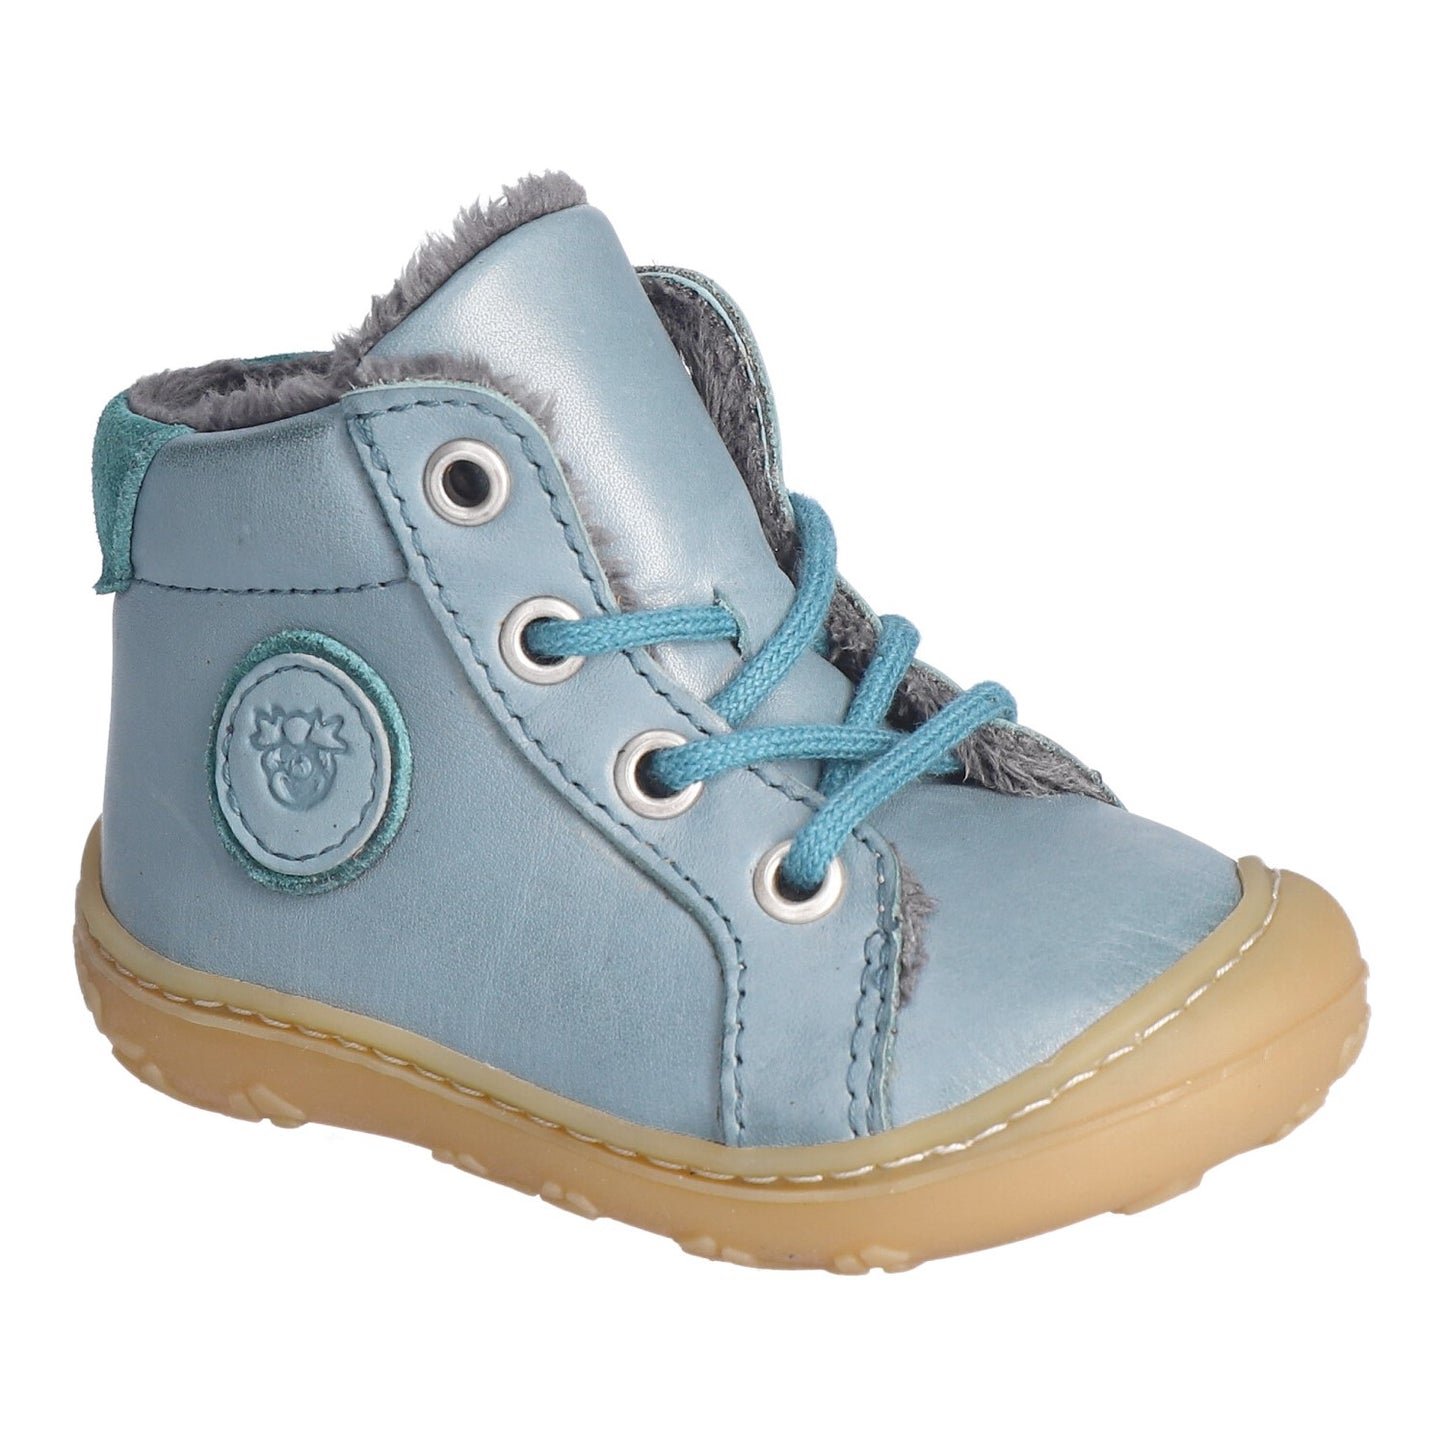 A unisex ankle boot by Ricosta, style Georgie, in teal leather with lace fastening. Right side view.